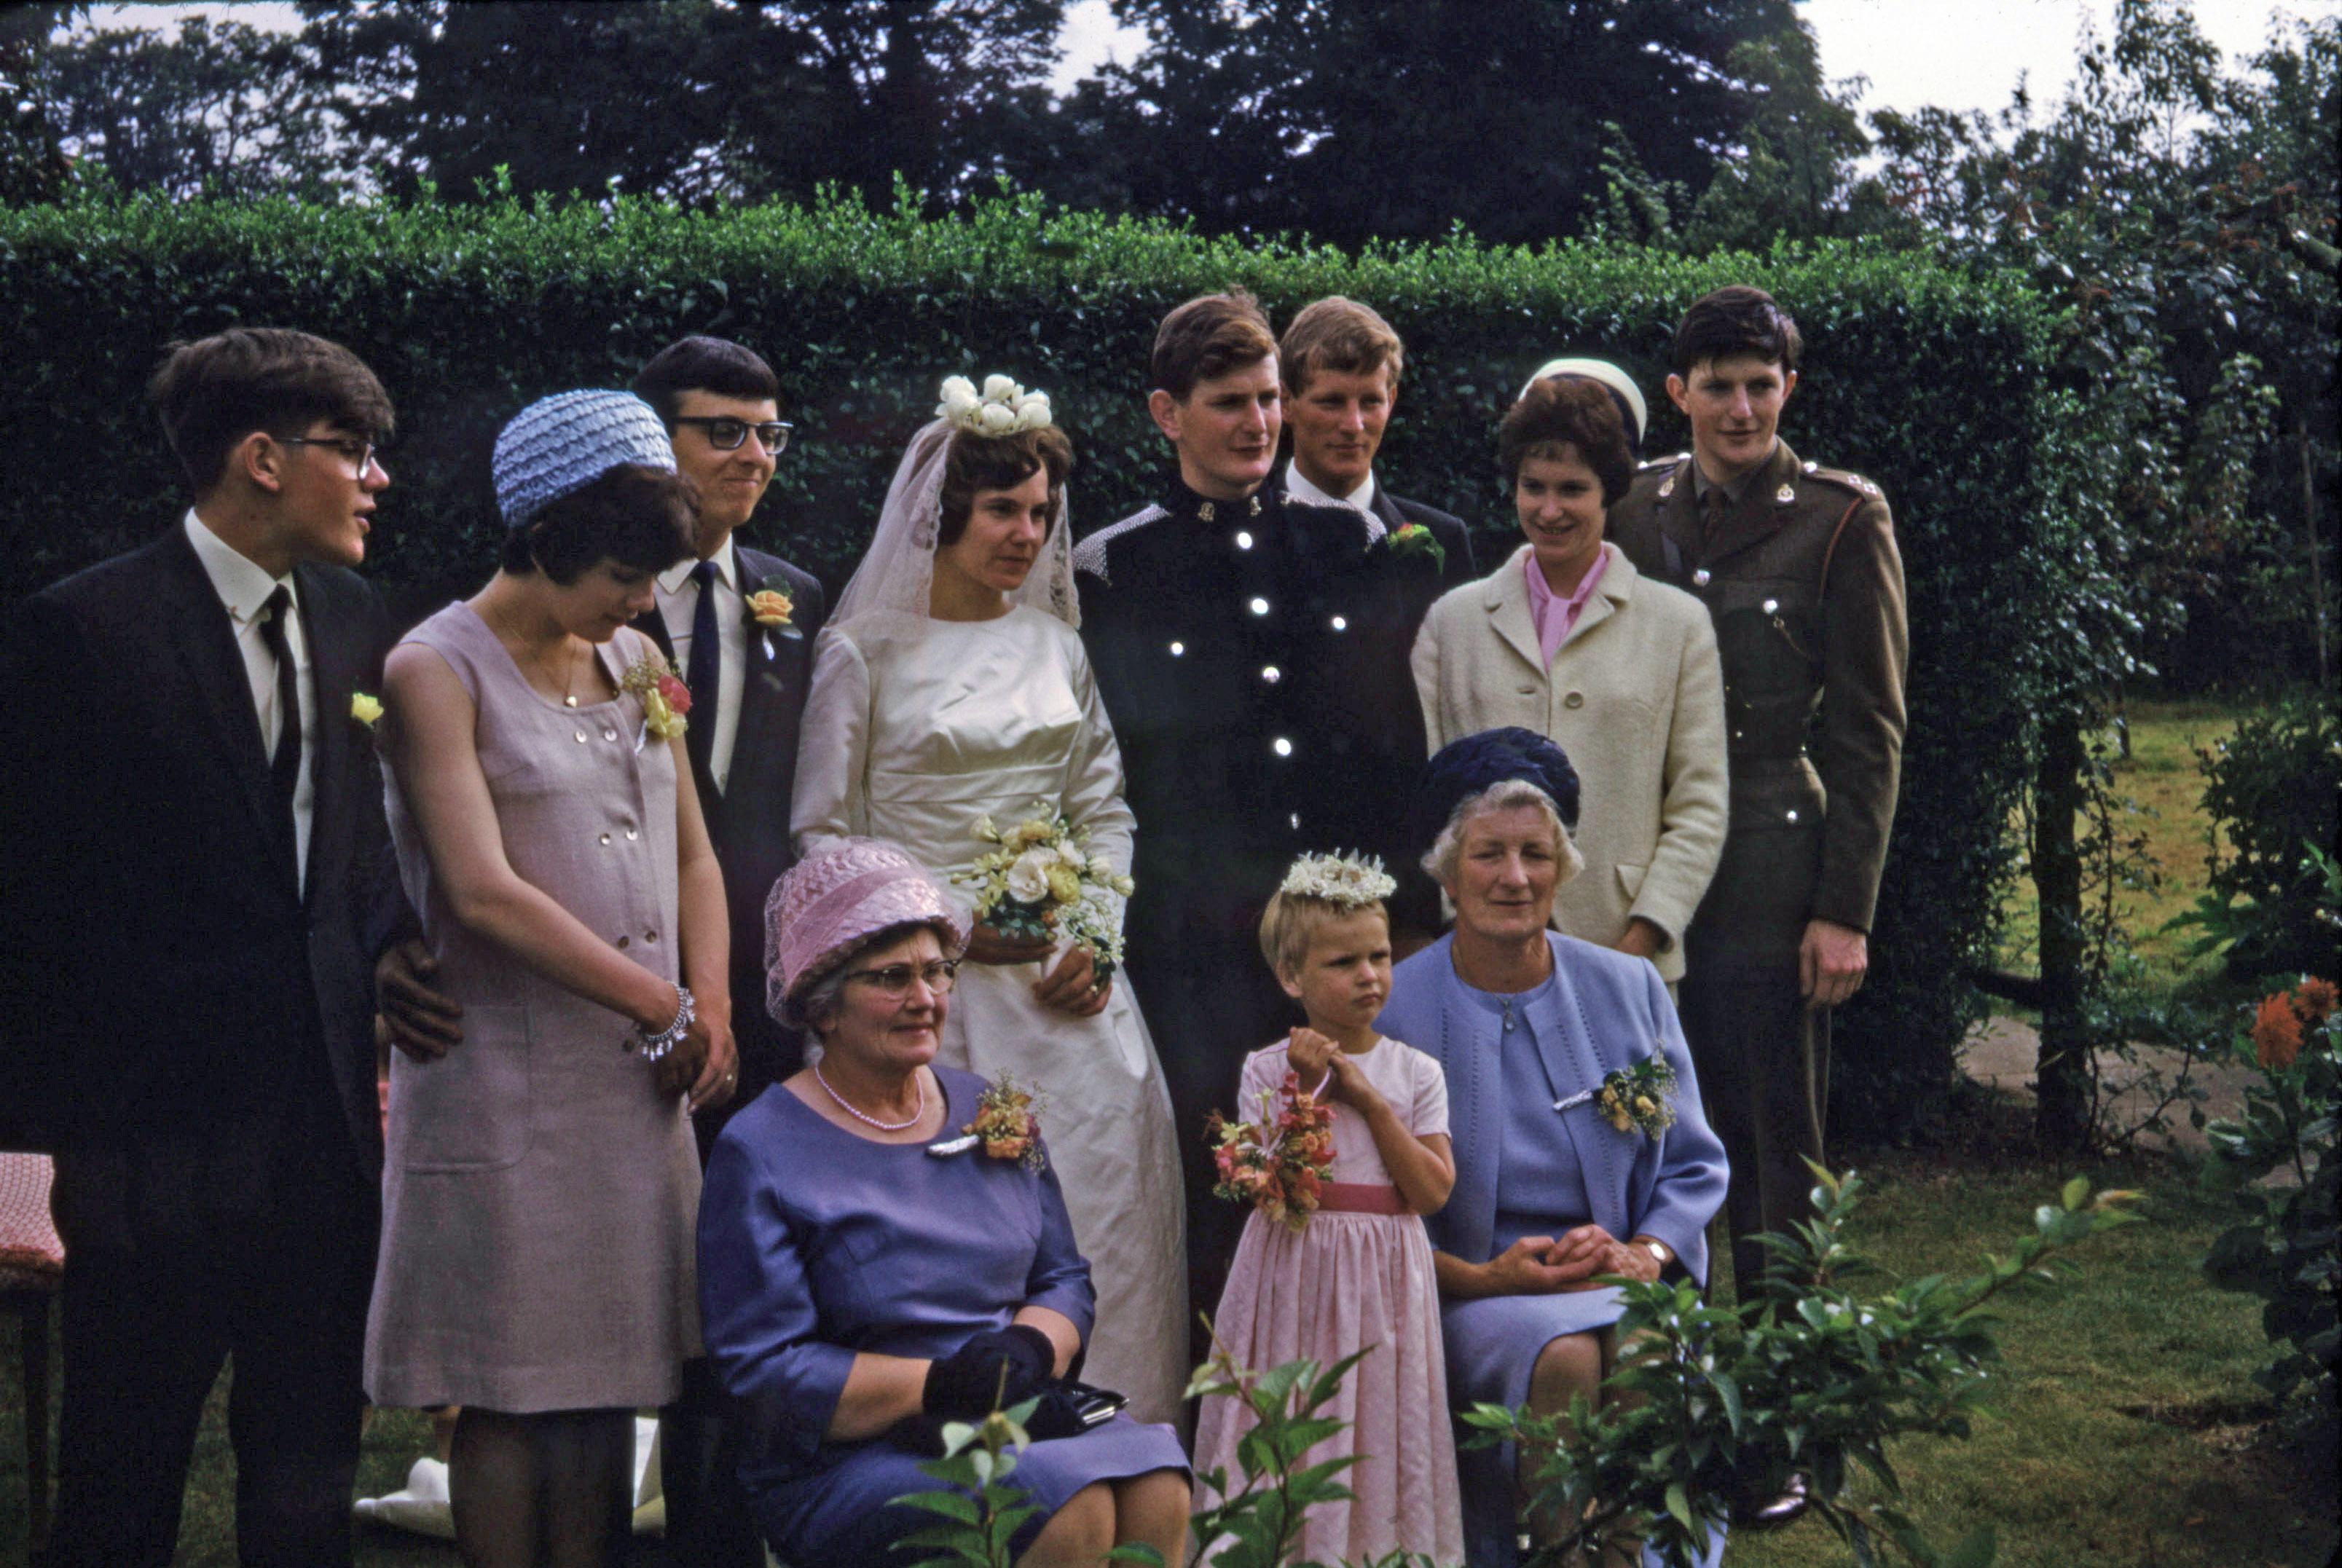 19 Aug 1965 Group picture at Henry and Ann's wedding